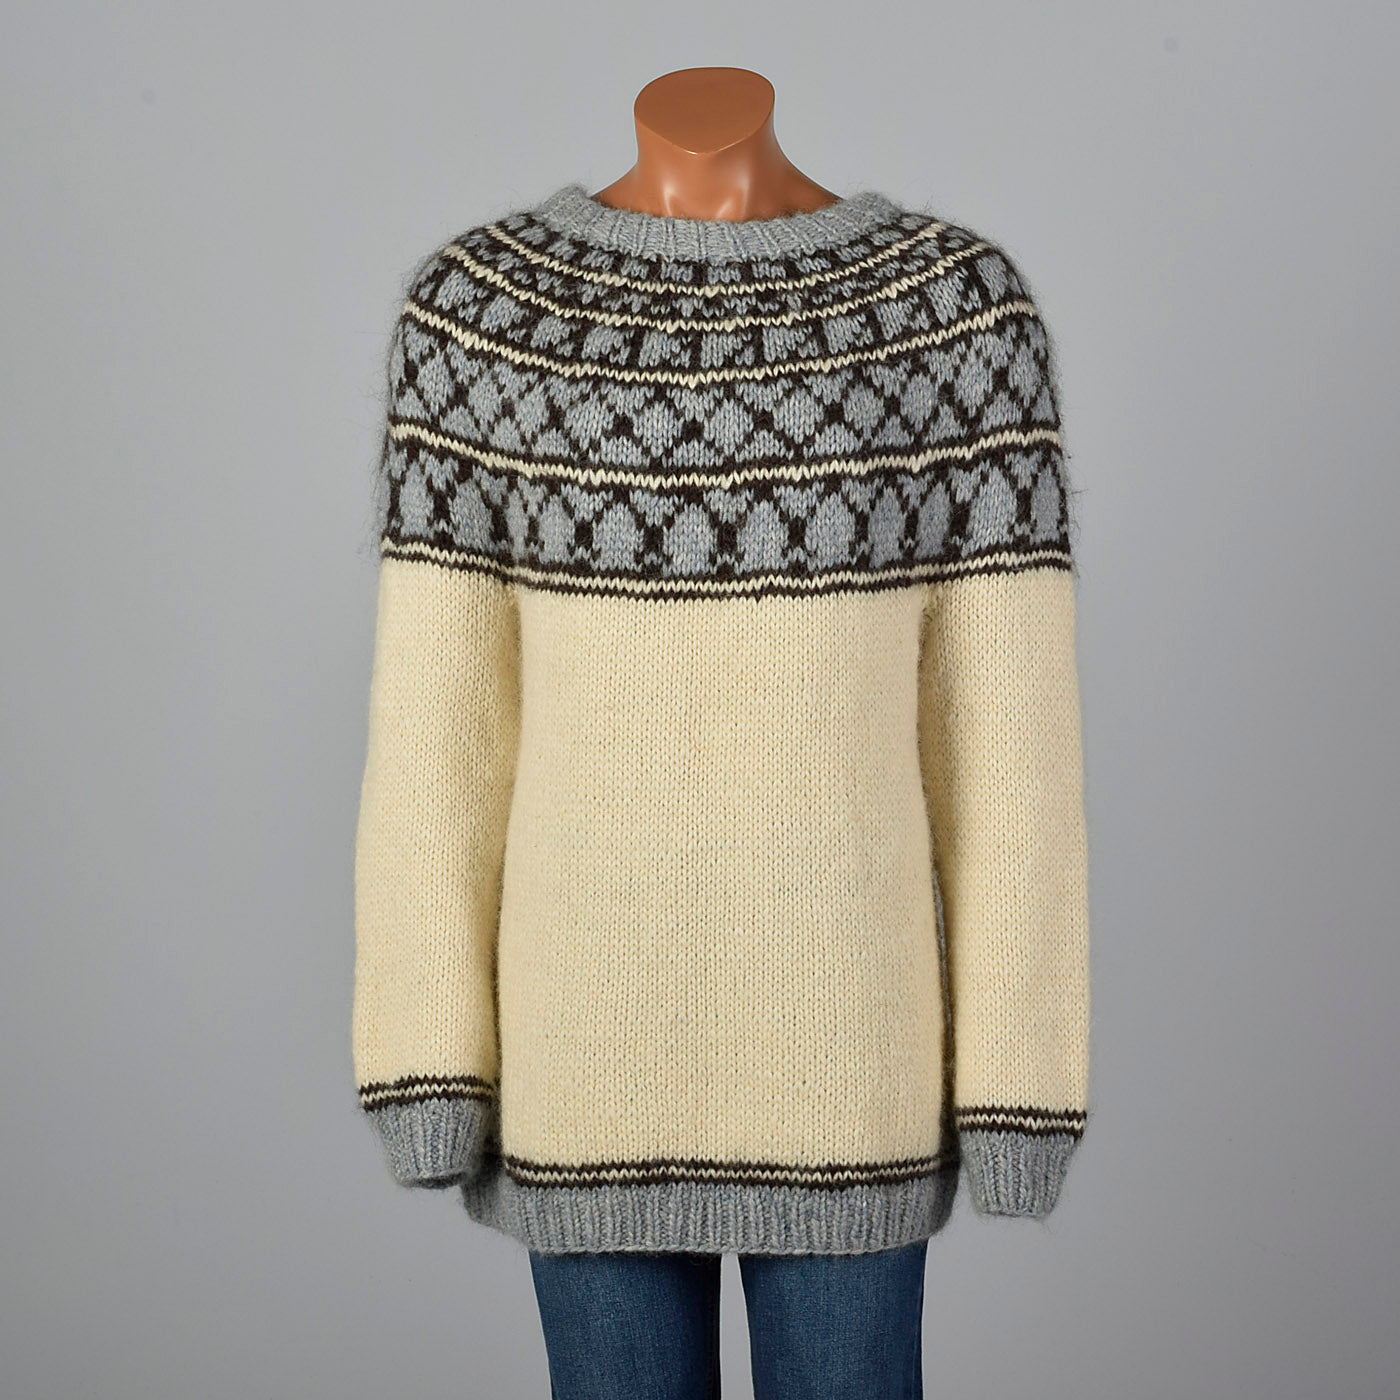 1960s Mens Cream Sweater with Gray, Blue, and Black Knit